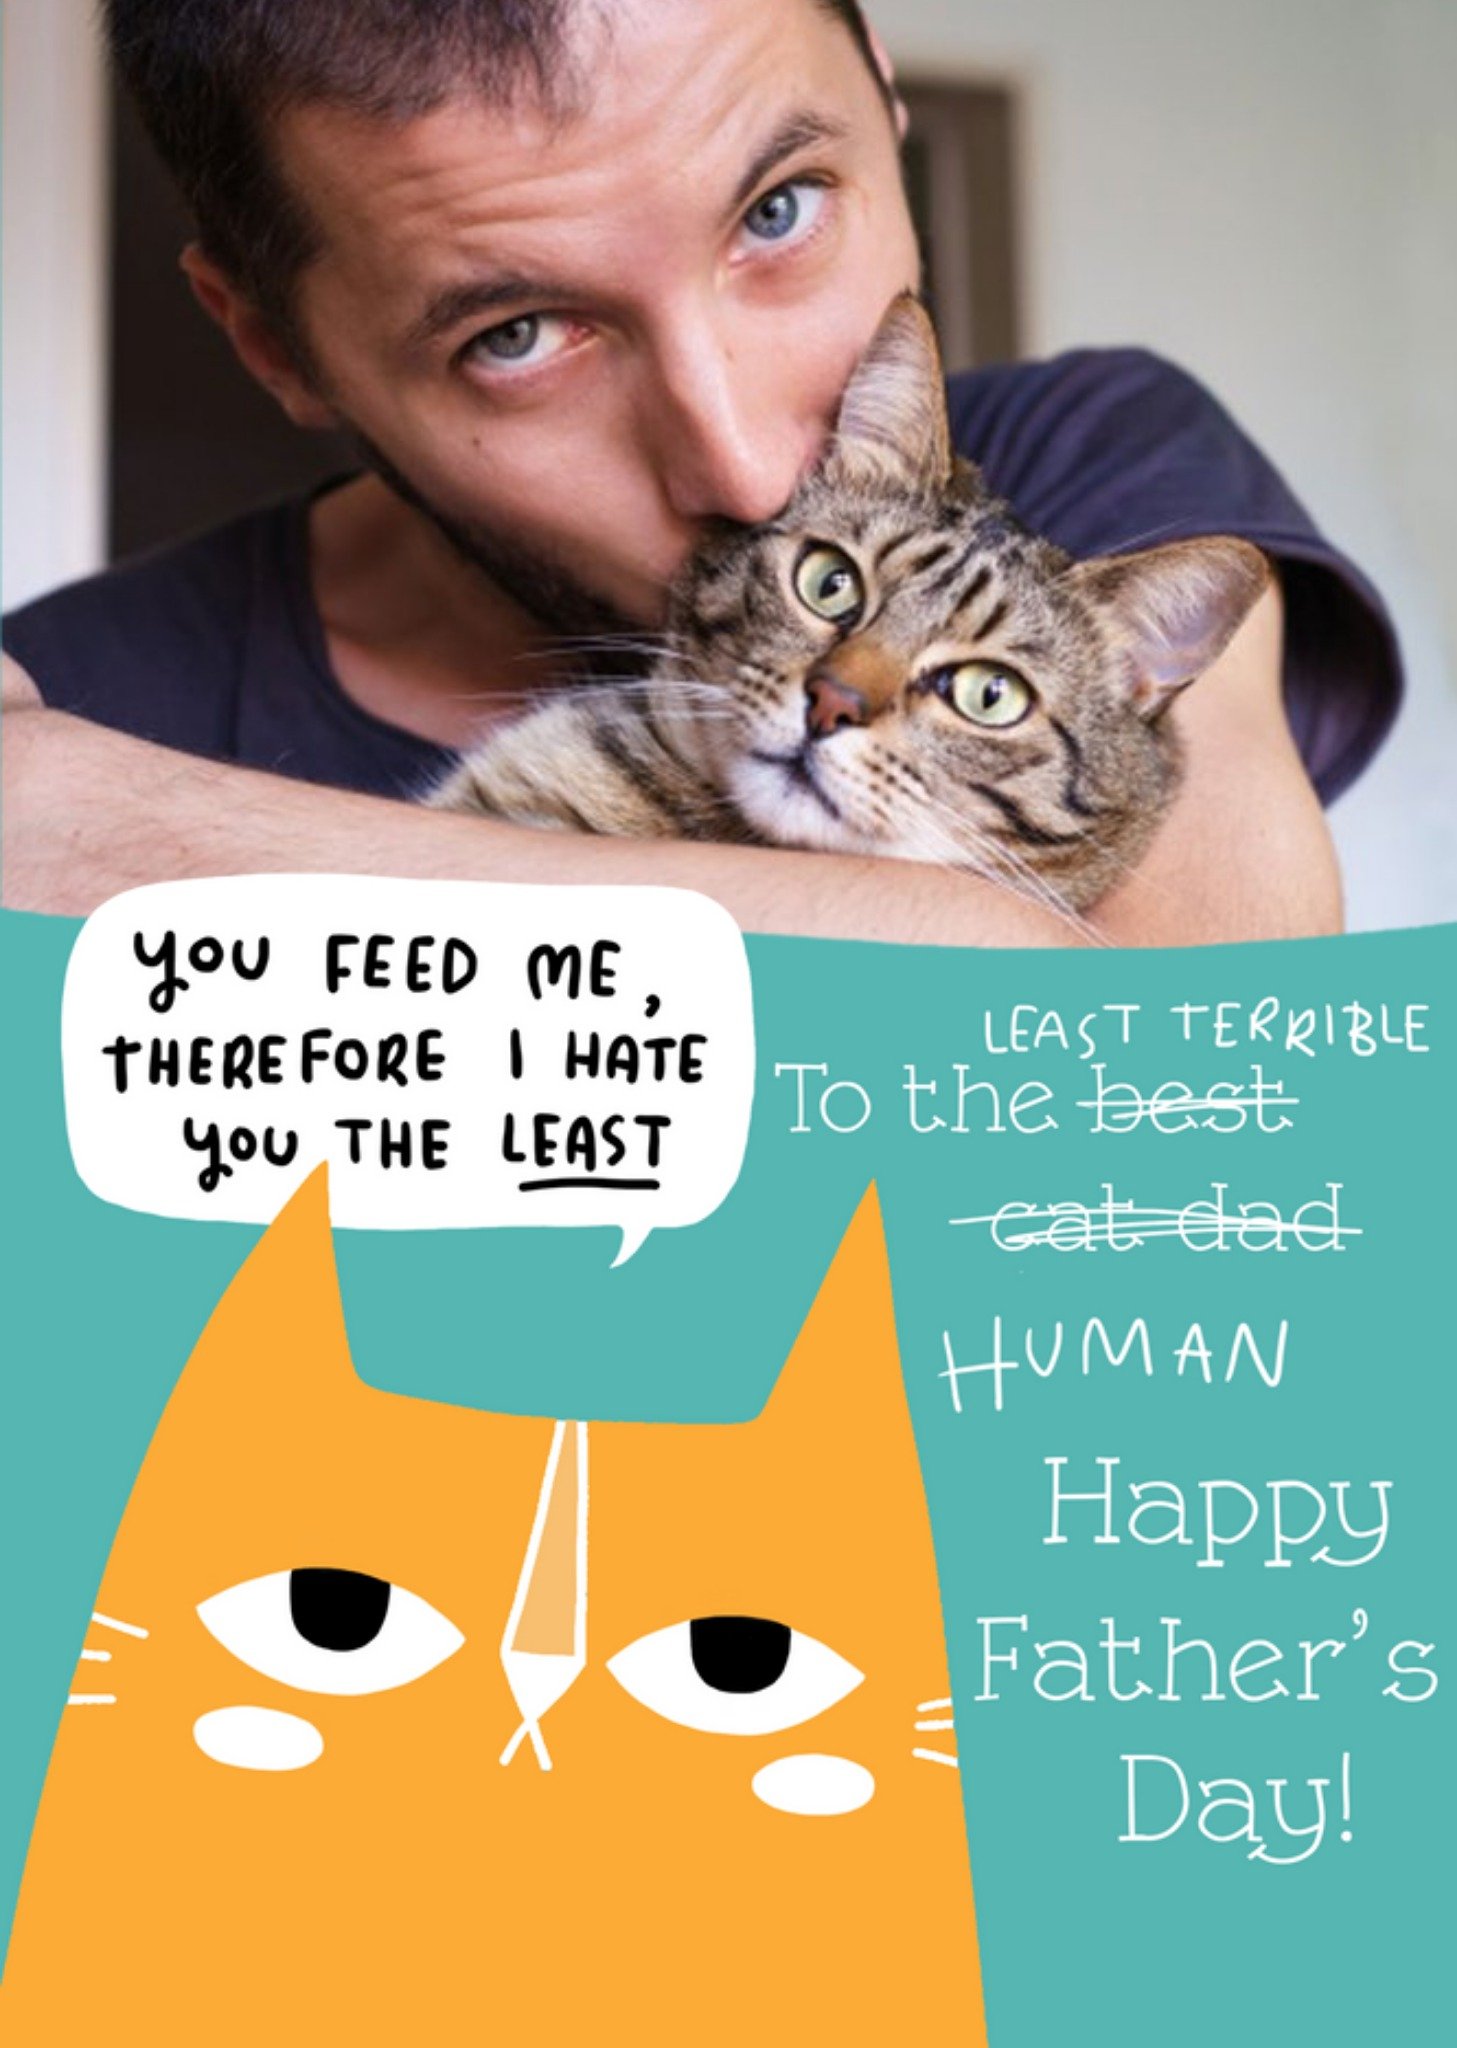 Moonpig Least Terrible Human From The Cat Photo Upload Father's Day Card Ecard